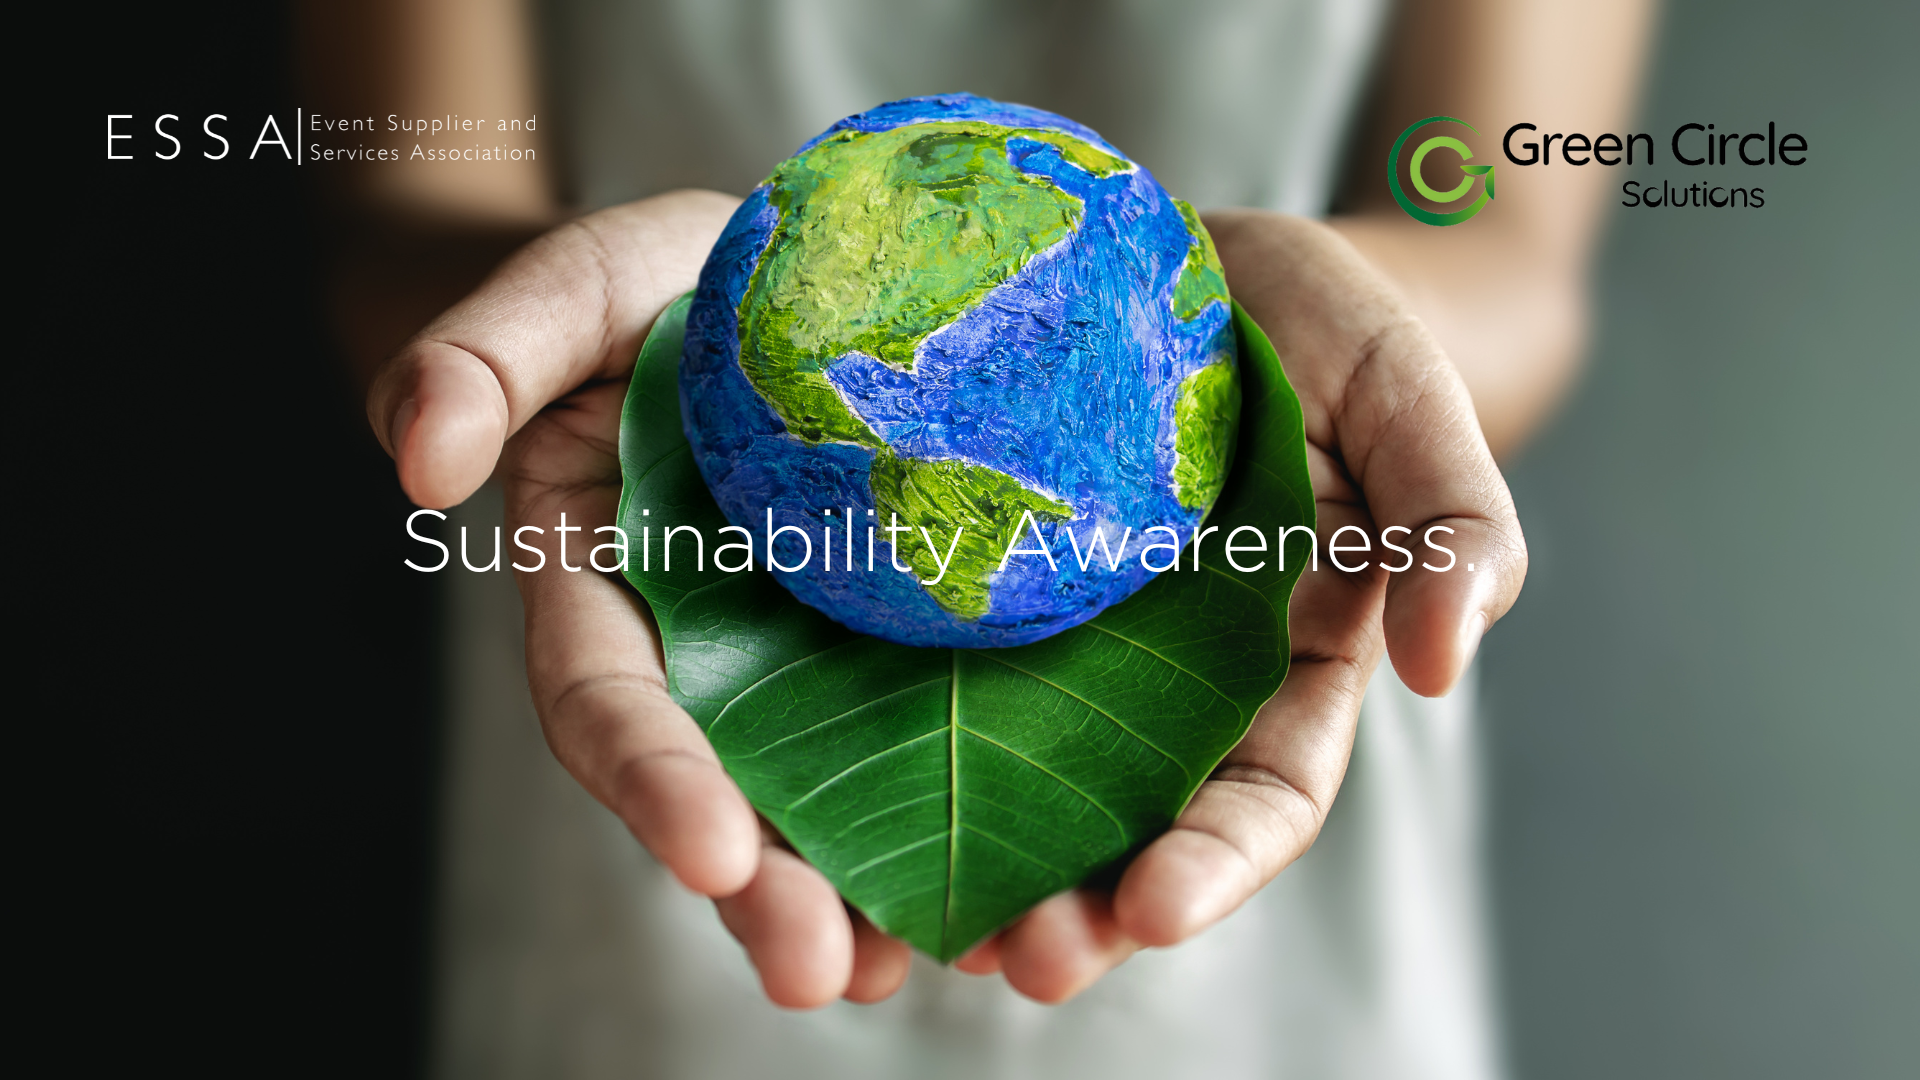 ESSA launches Sustainability Awareness training course in National Recycle Week